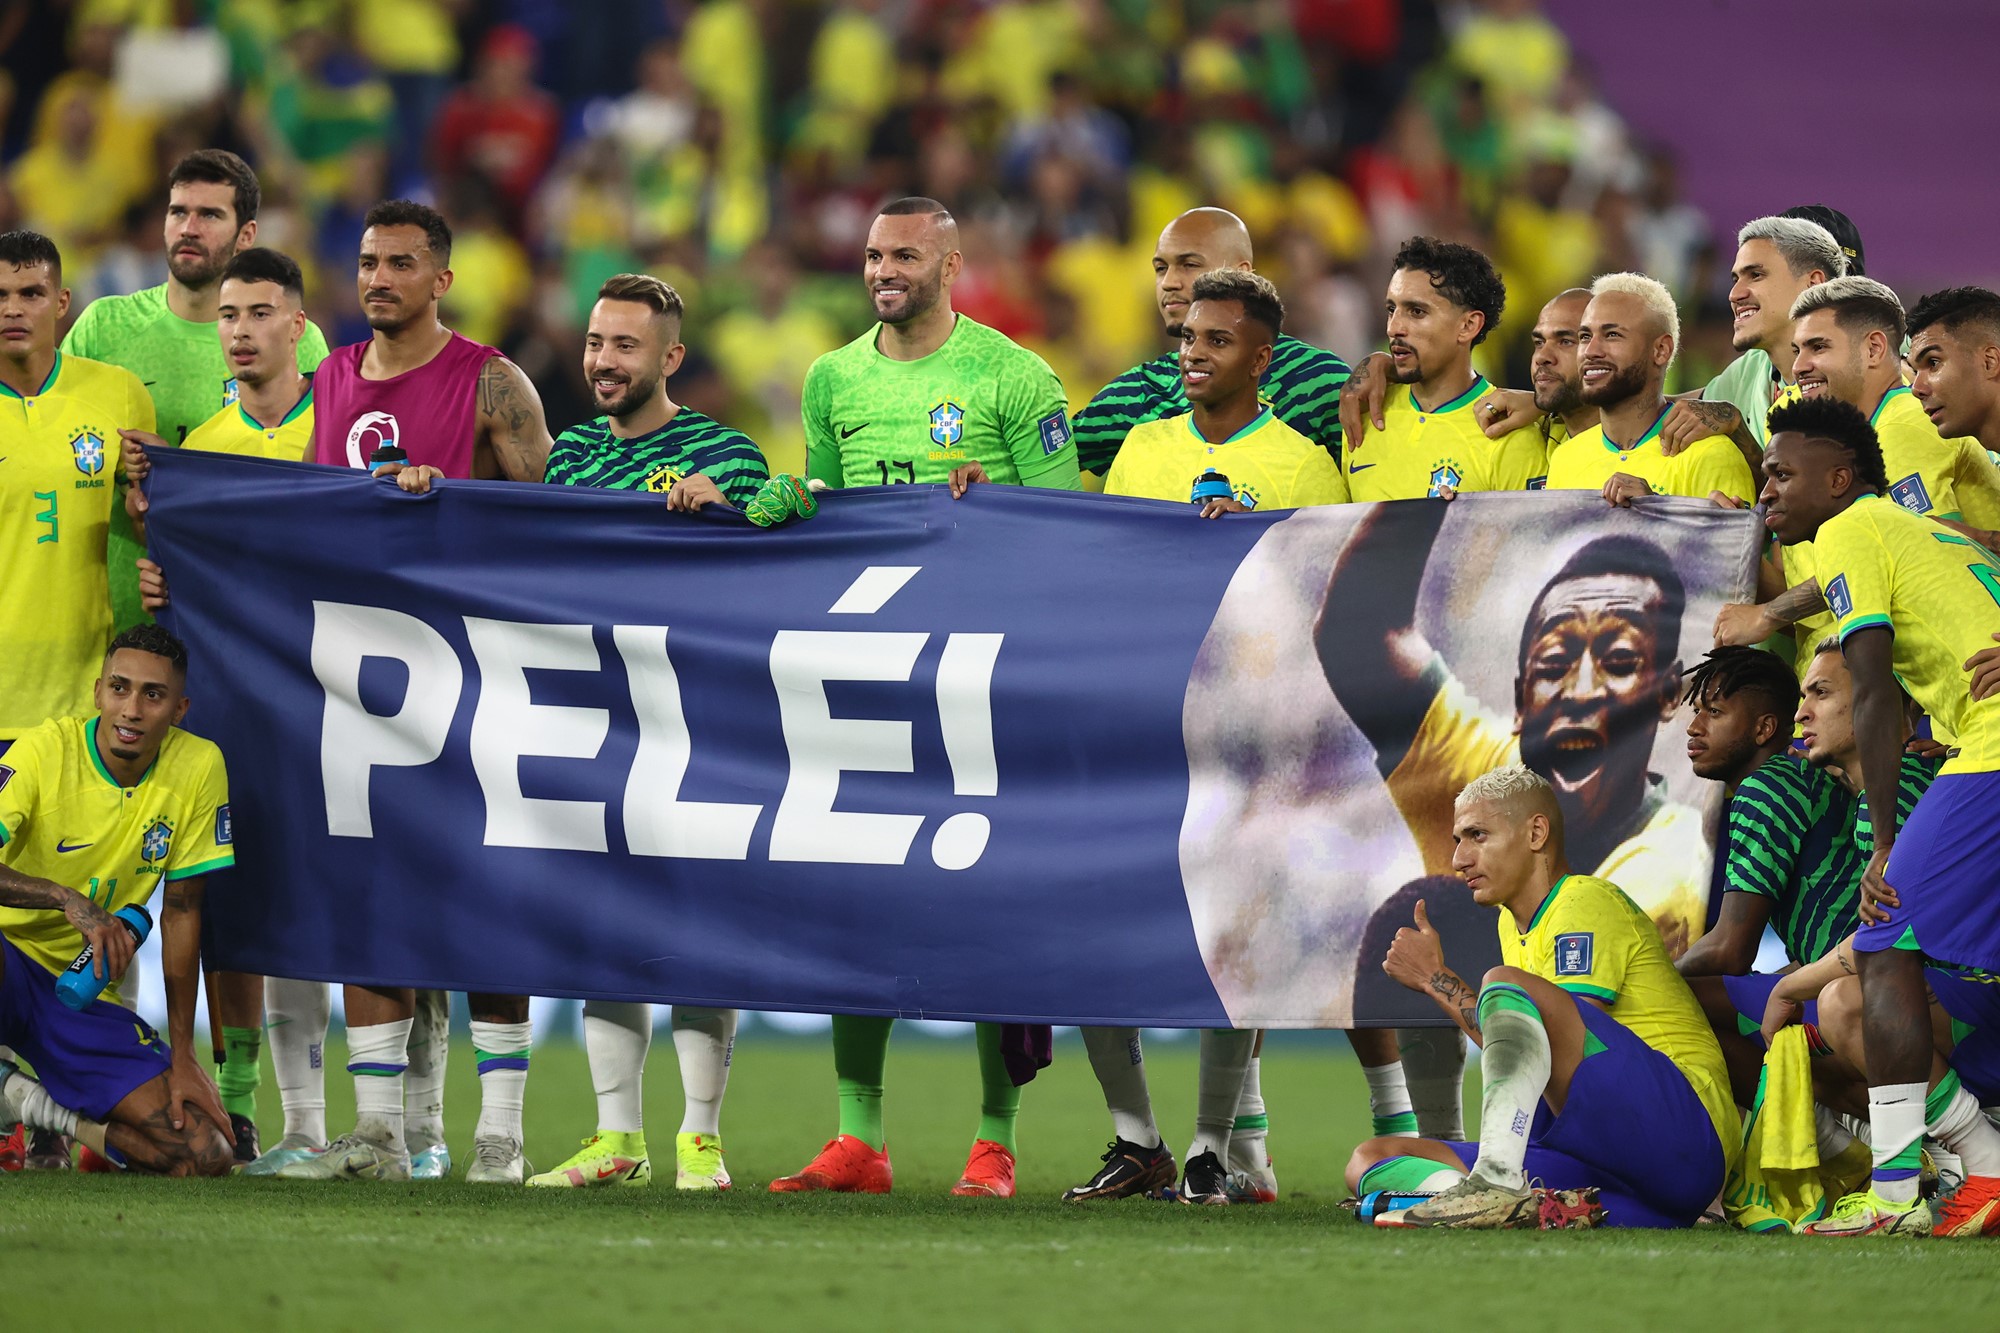 Brazil players hold up a banner reading Pelé after beating South Korea at the Qatar FIFA World Cup.